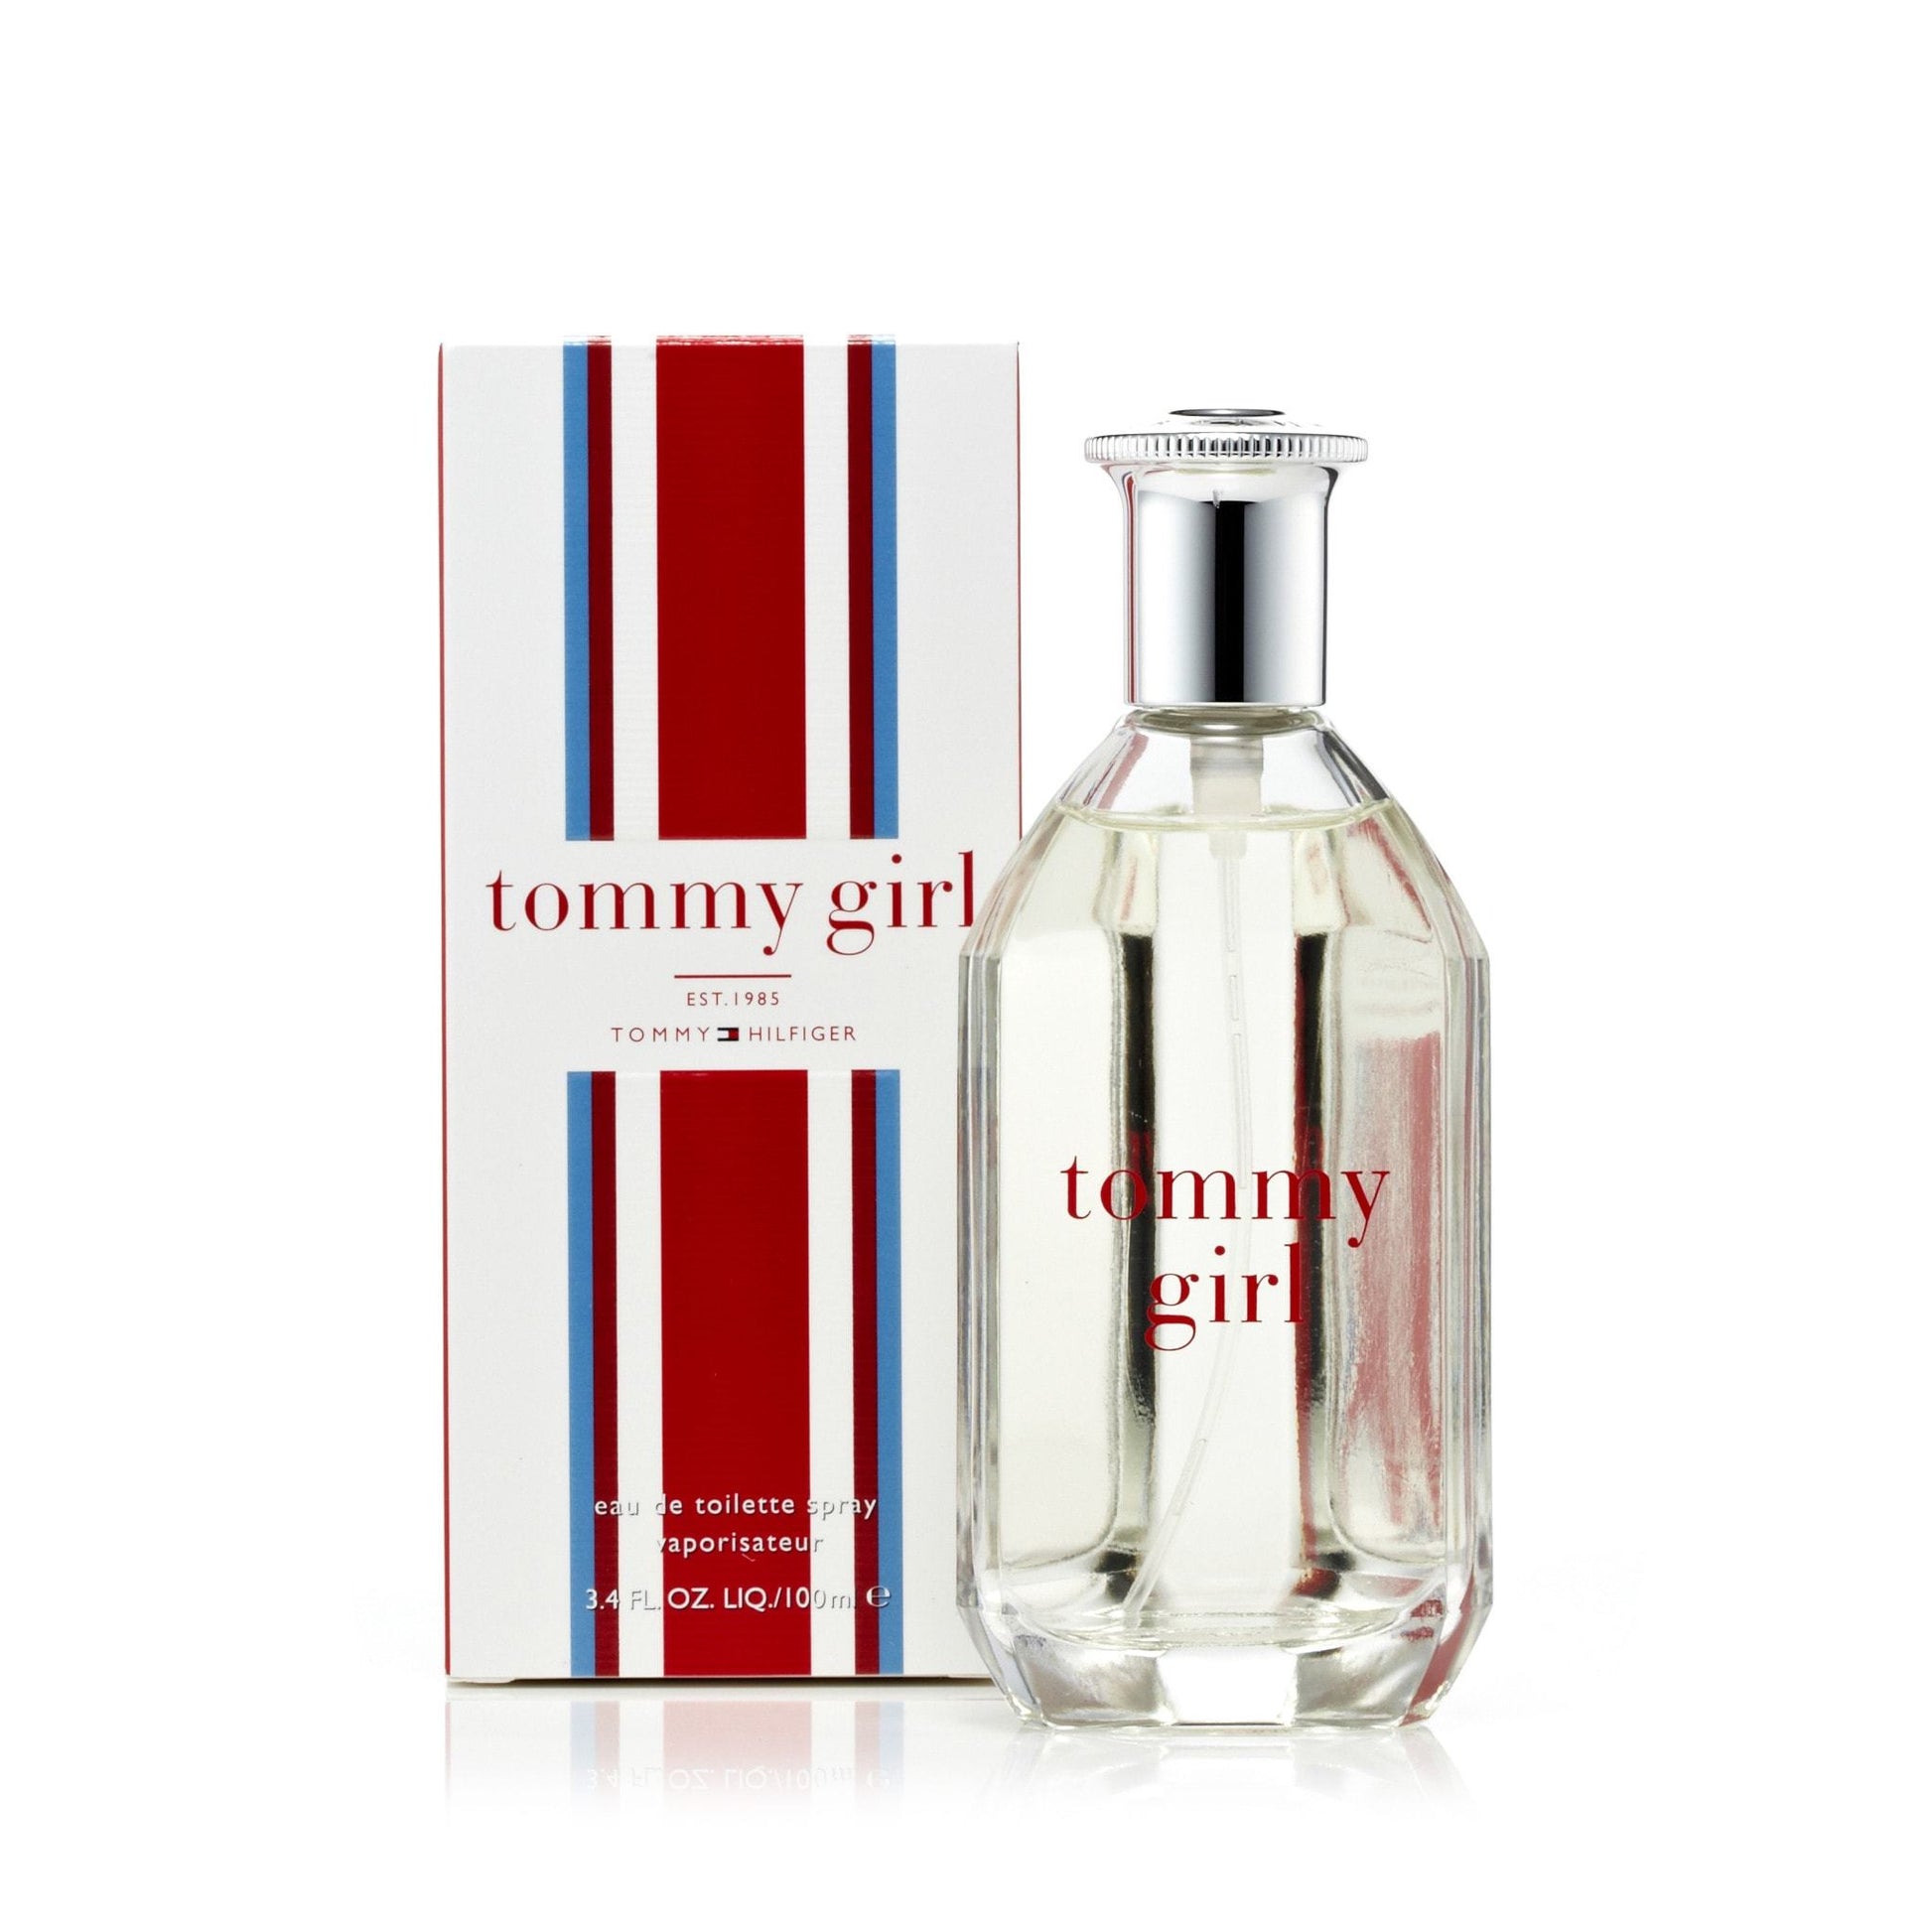 Tommy Girl Eau de Toilette Spray for Women by Tommy Hilfiger, Product image 6